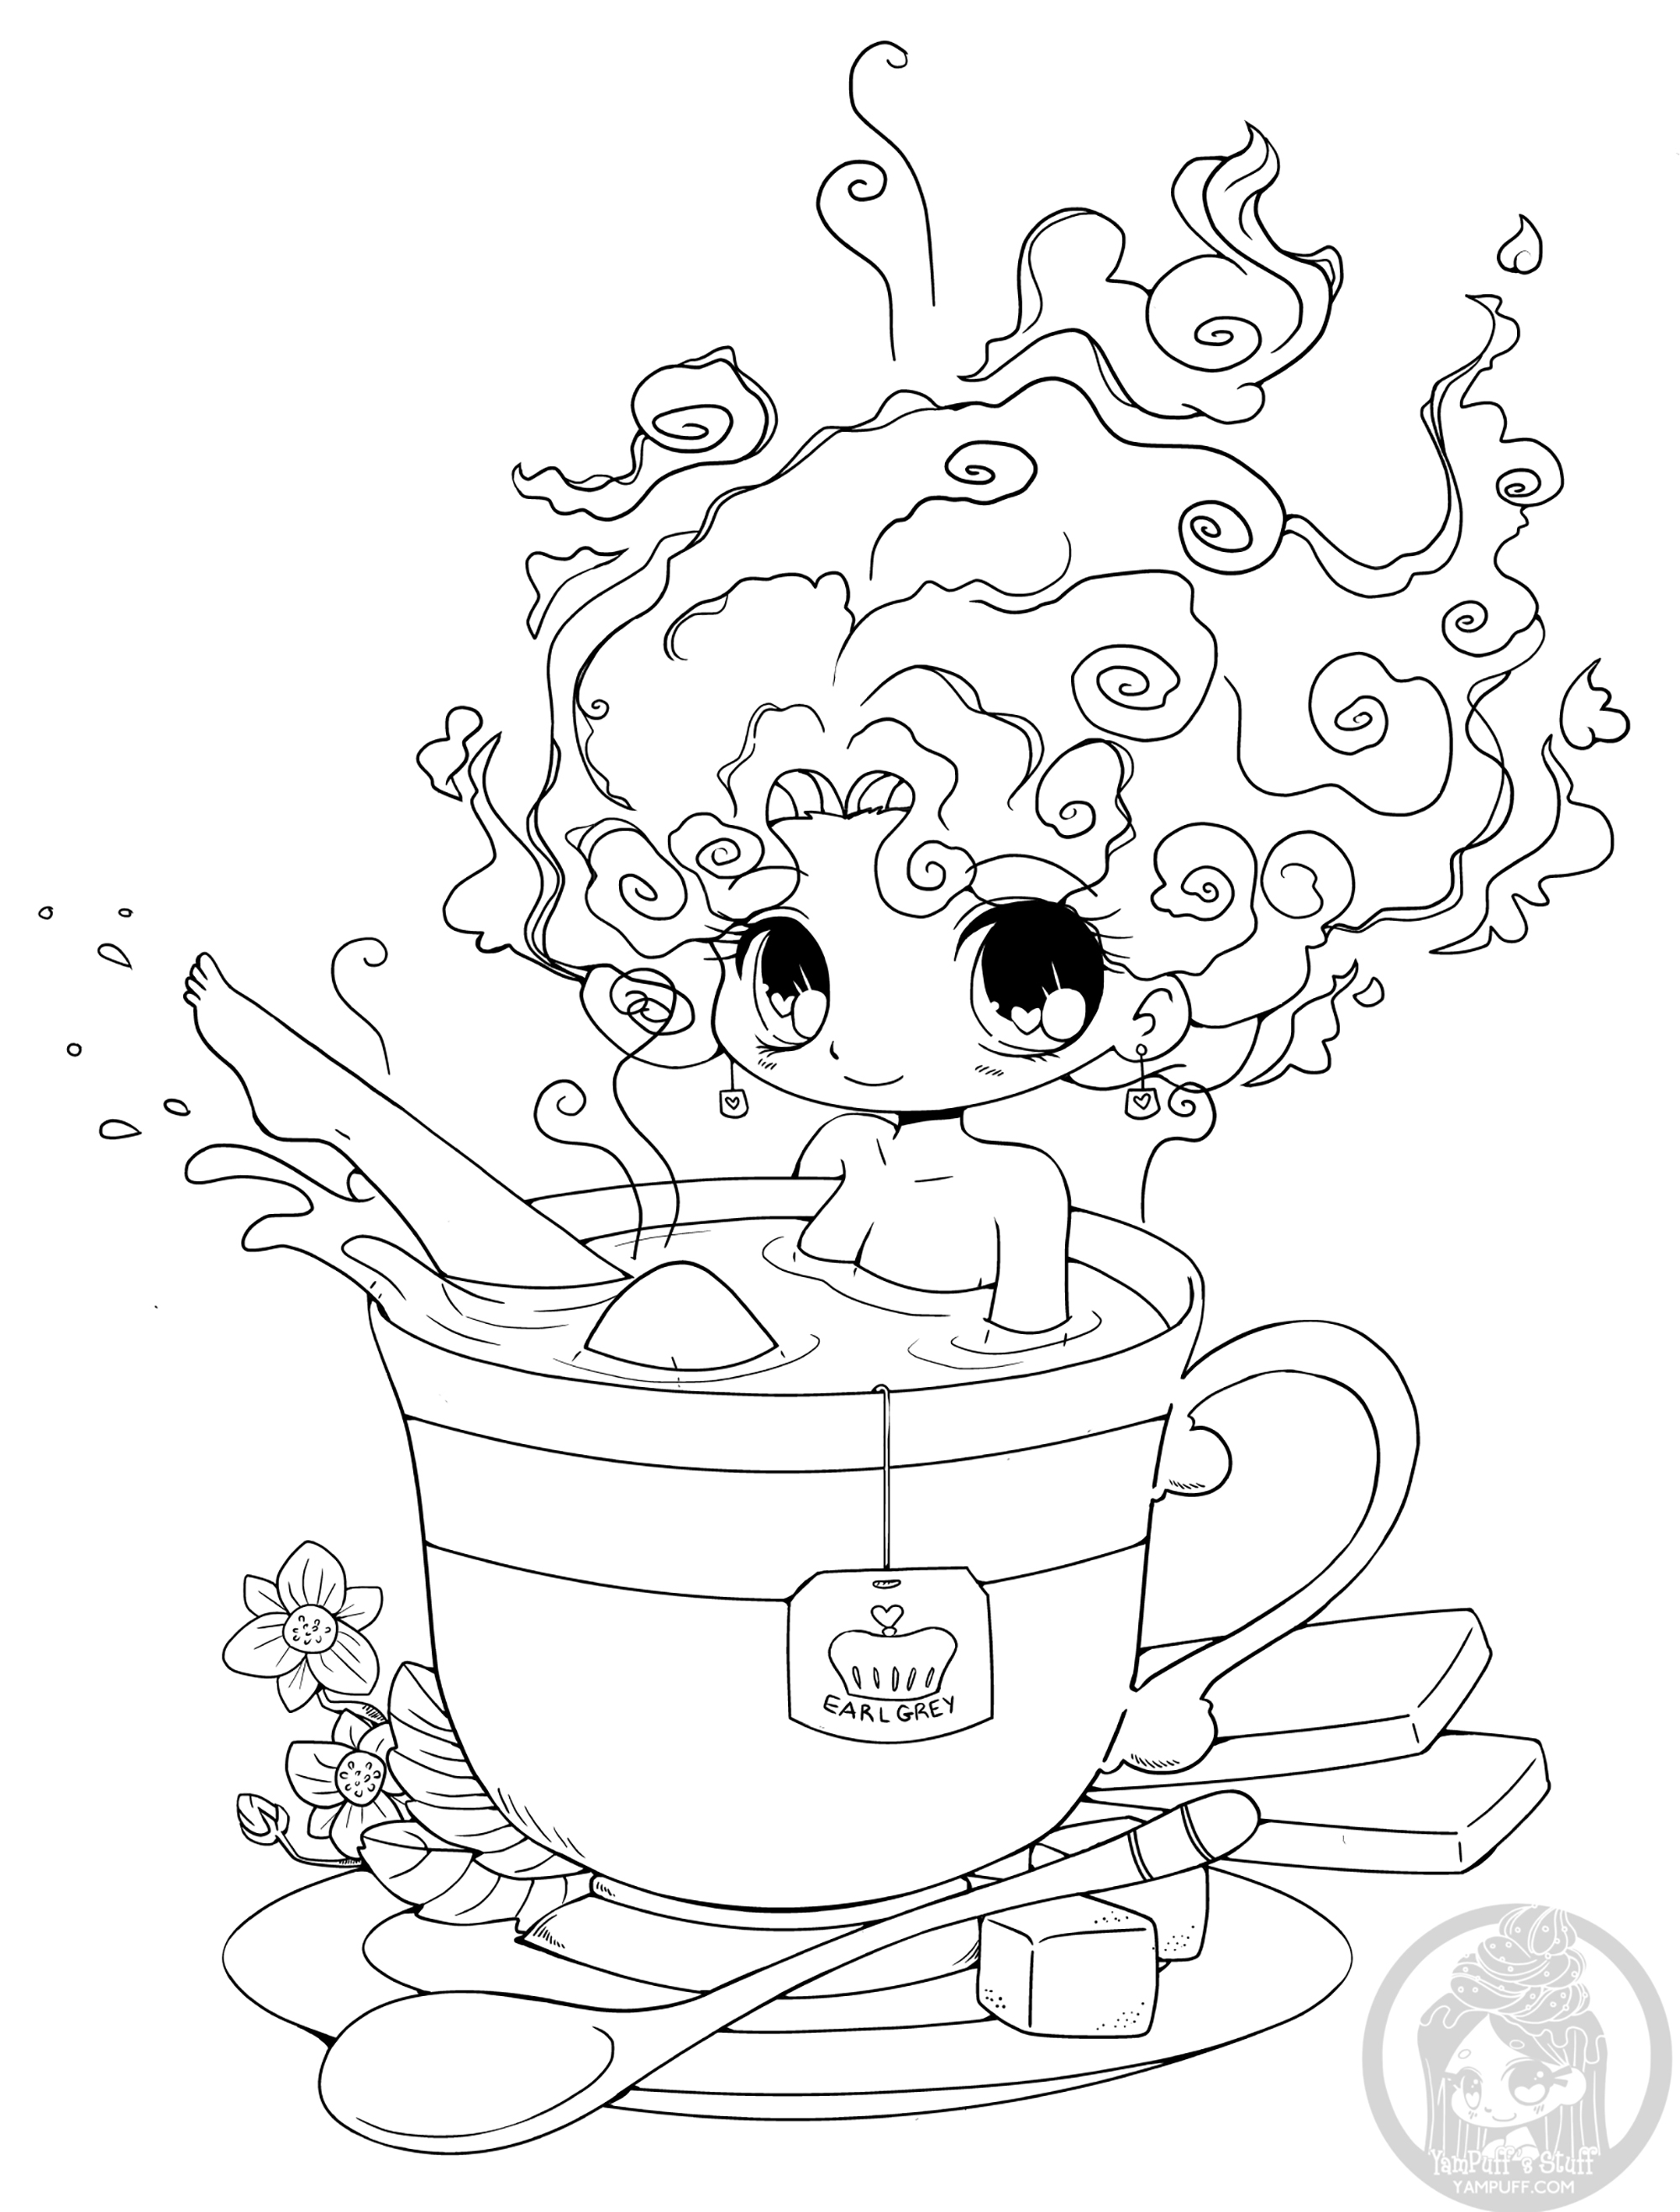 Cup of tea is the new bath! Come and try!, Artist : Yampuff